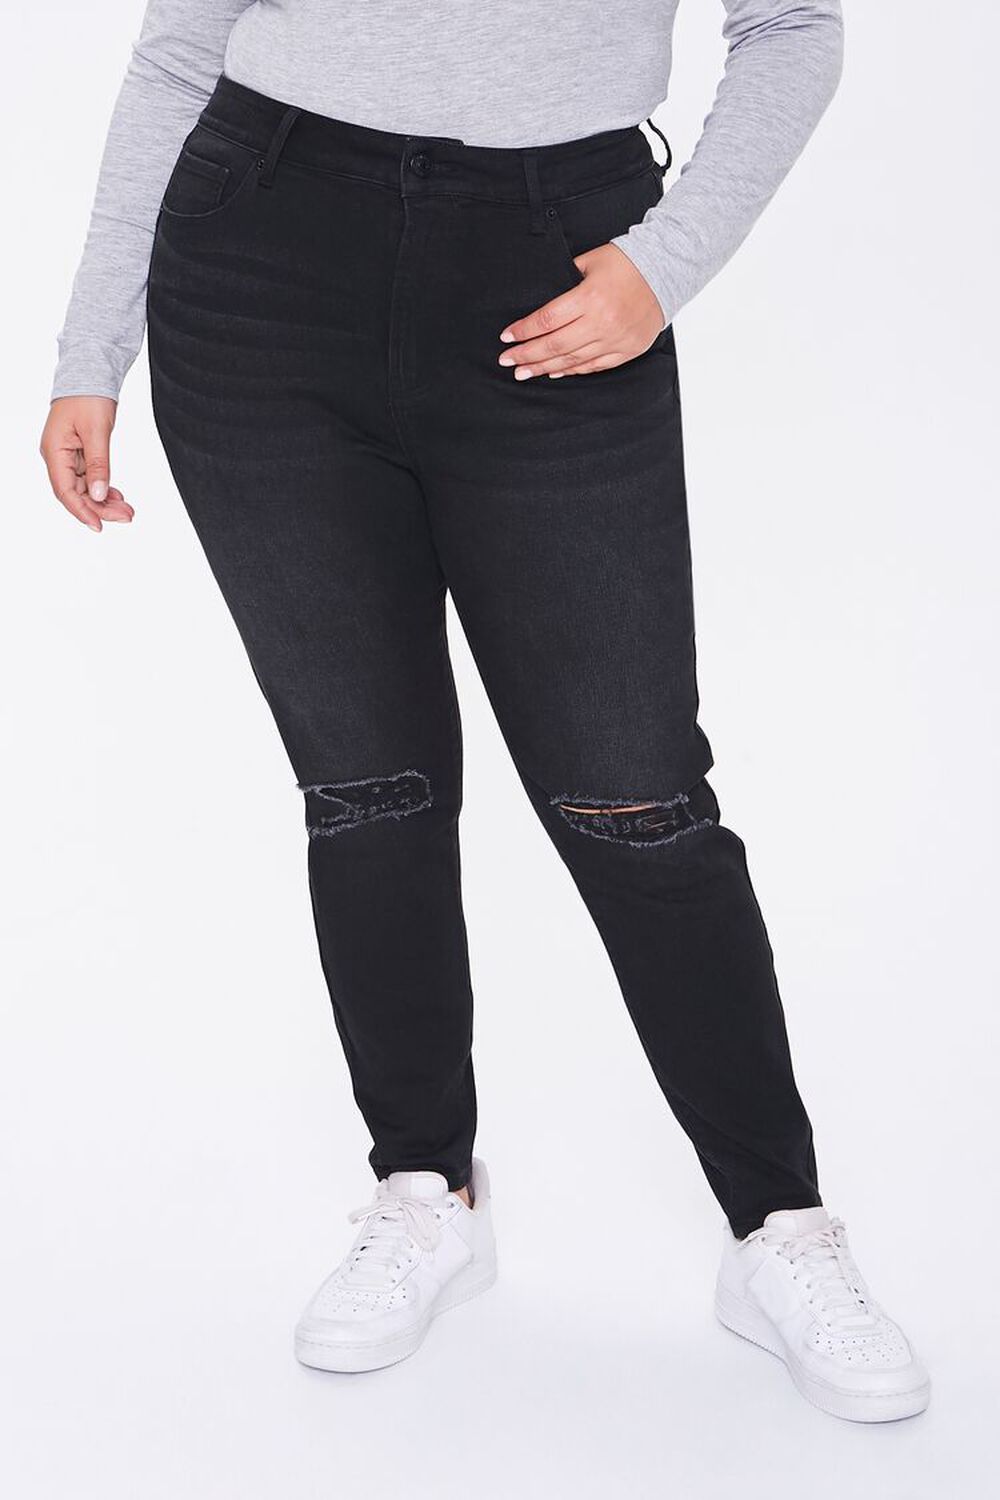 Plus Size Uplyfter Jeans